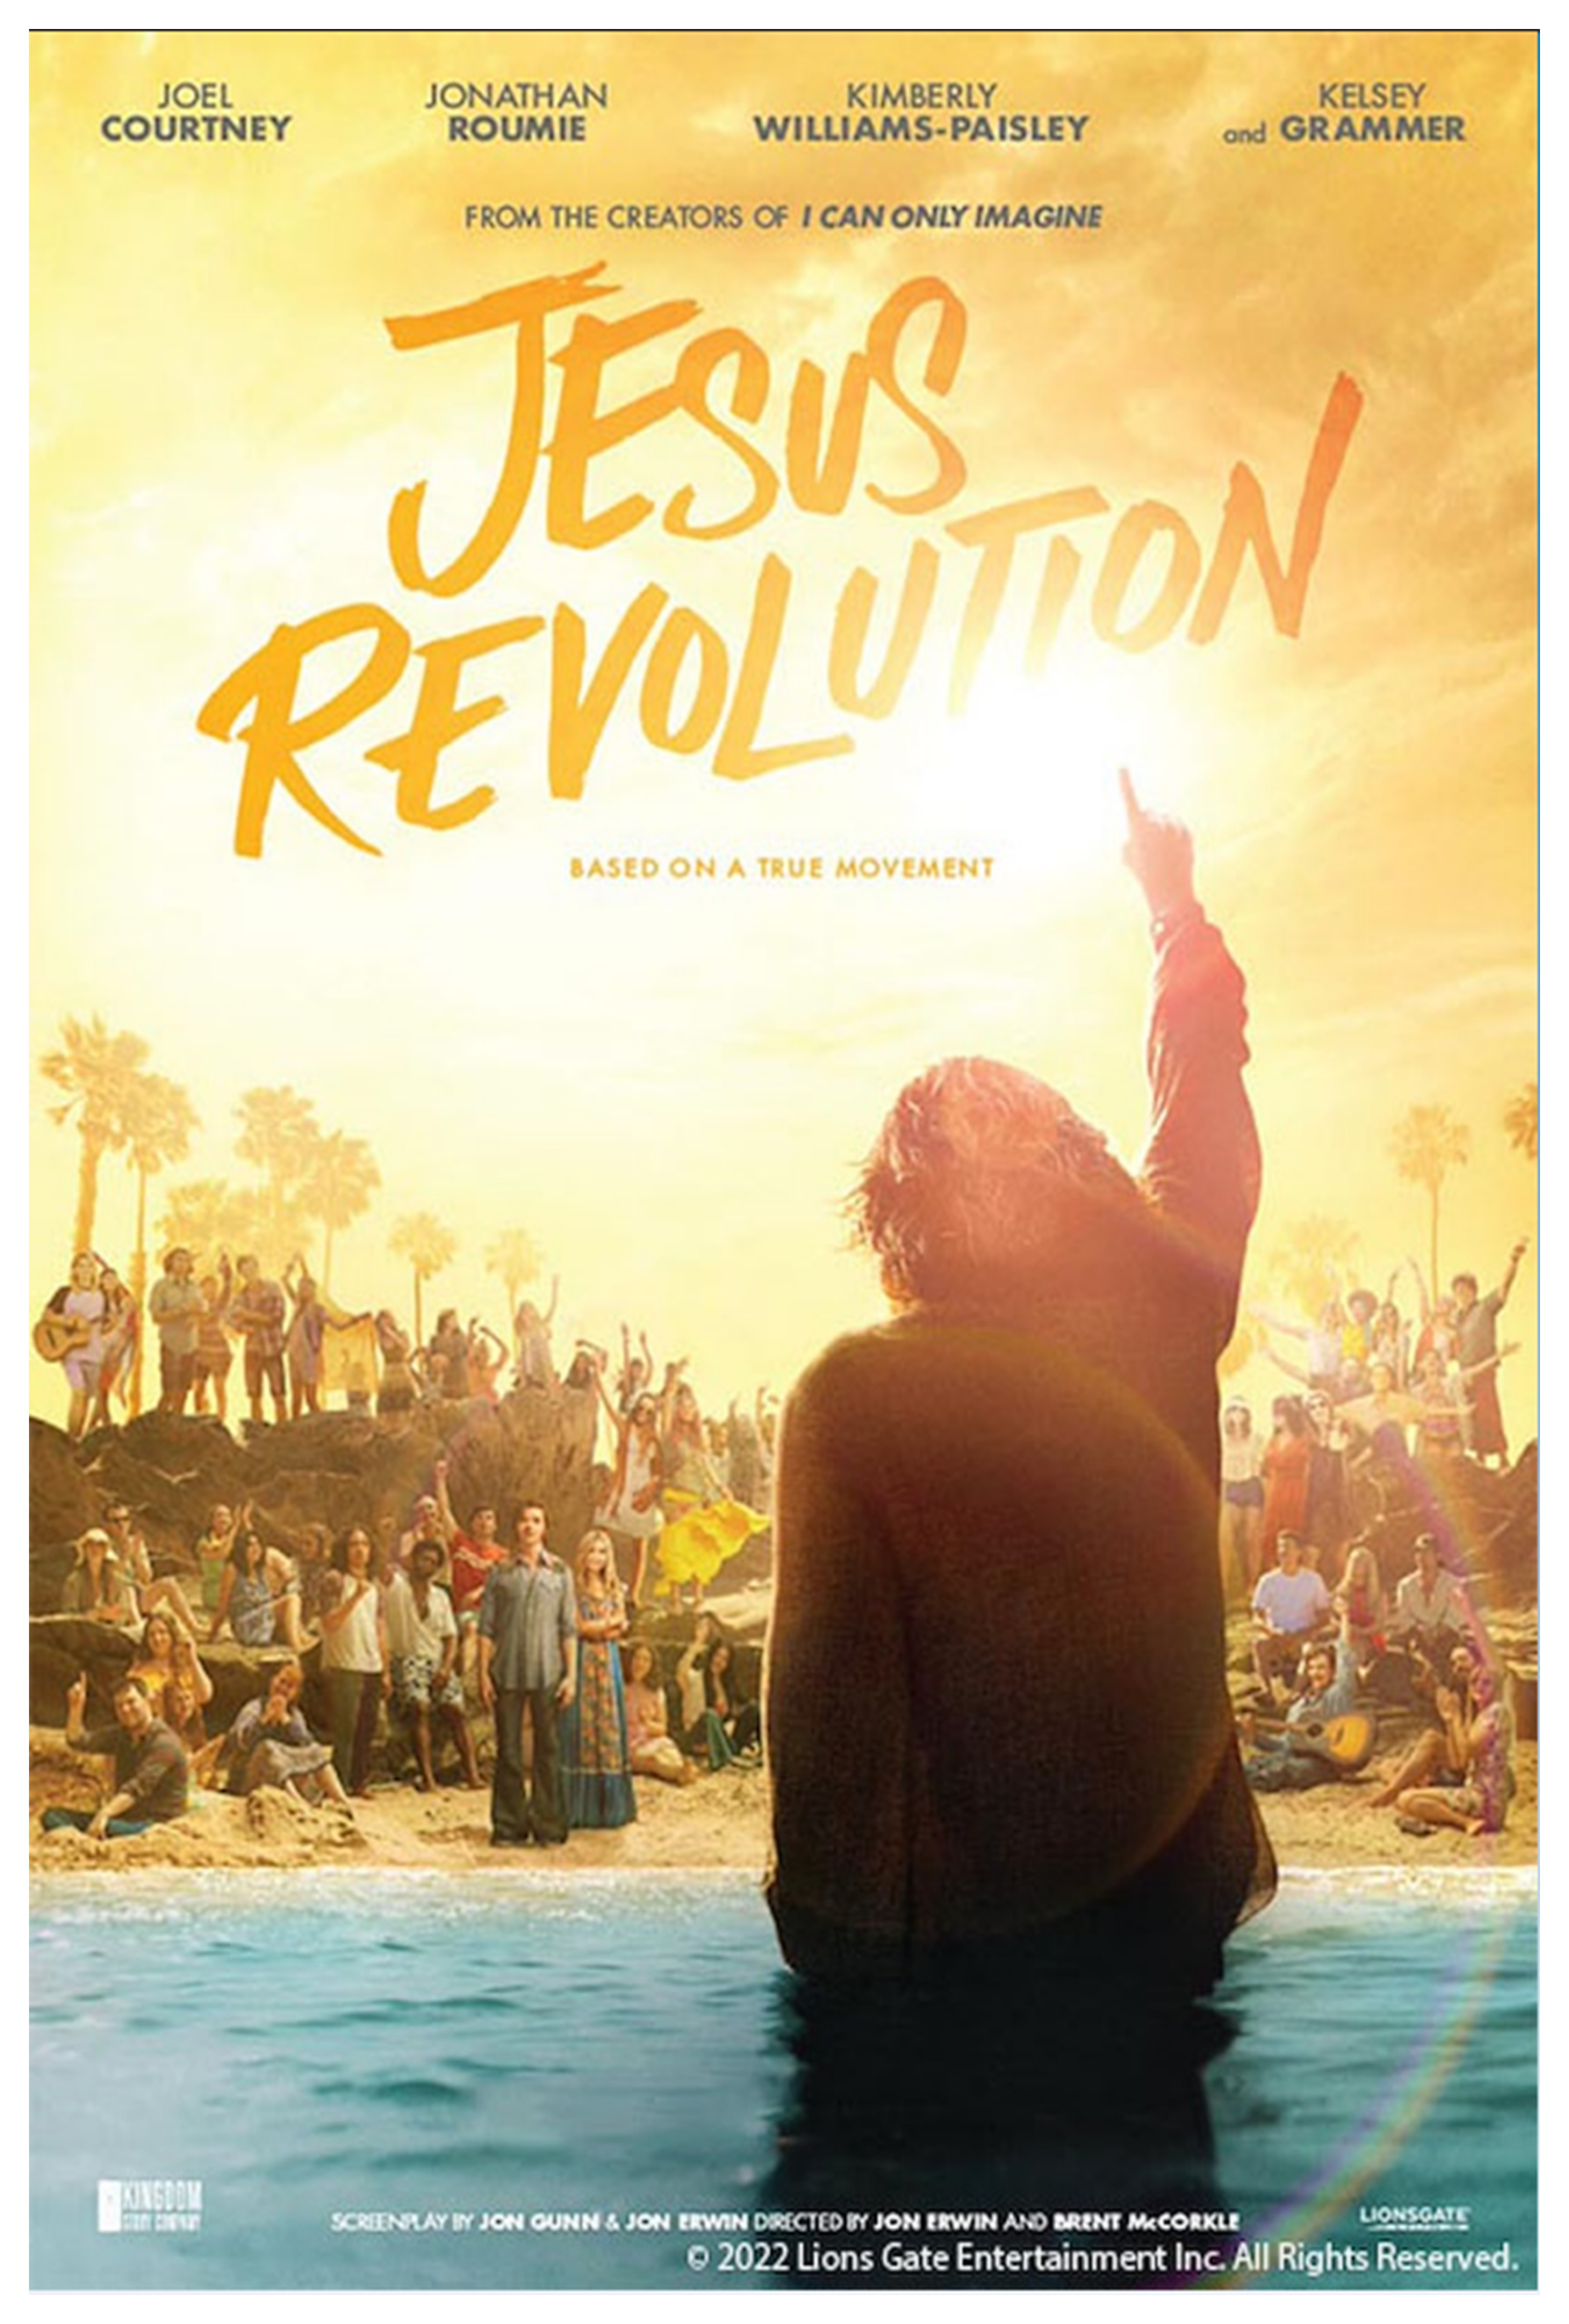 Film poster featuring a main with a raised fist standing before a  crowd.